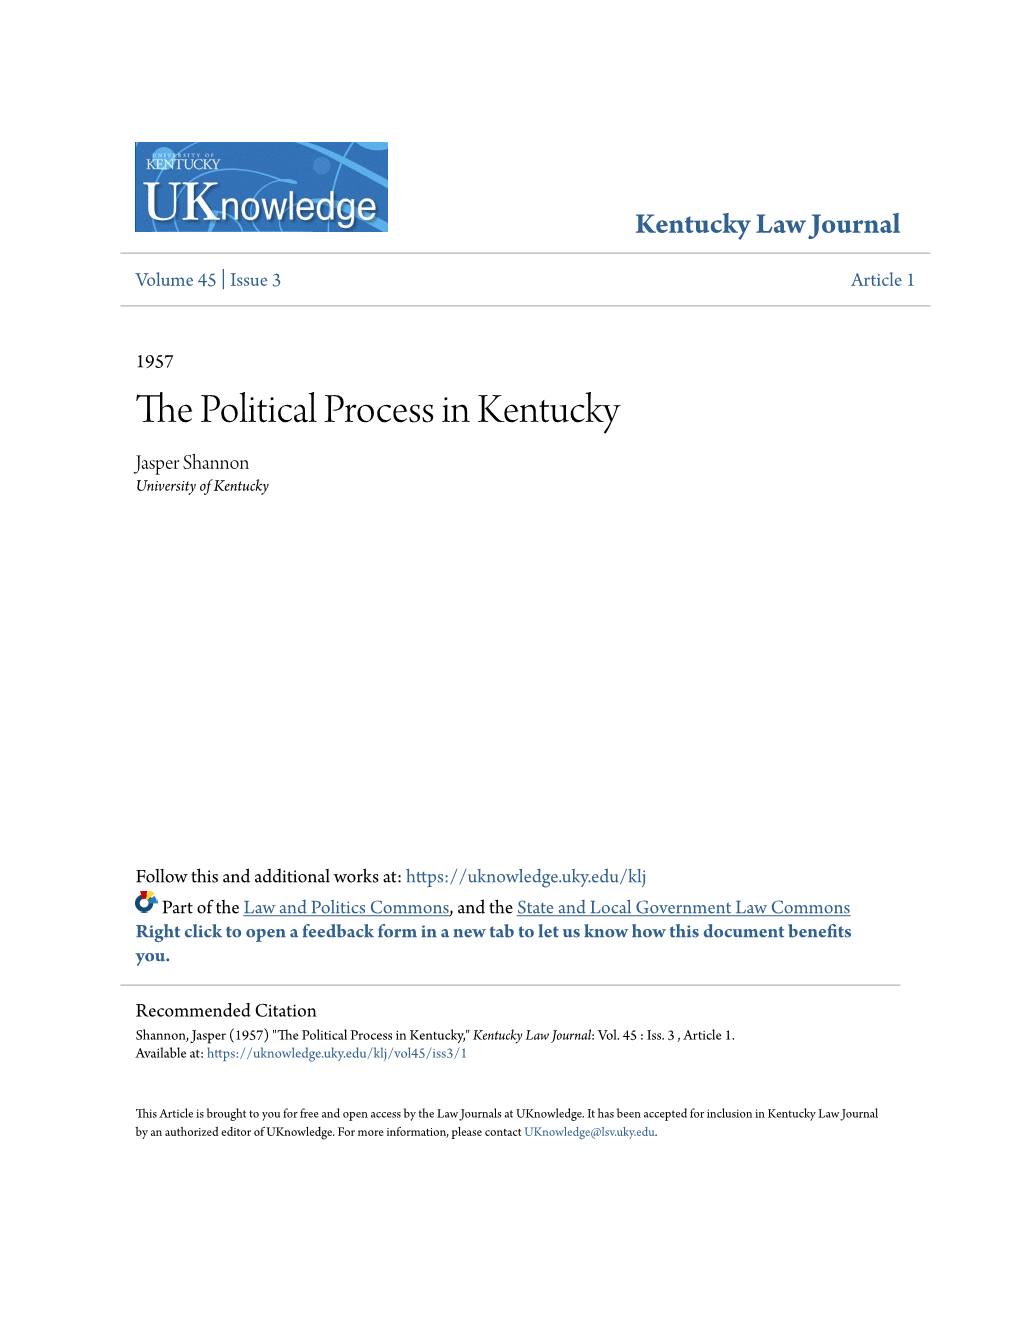 The Political Process in Kentucky